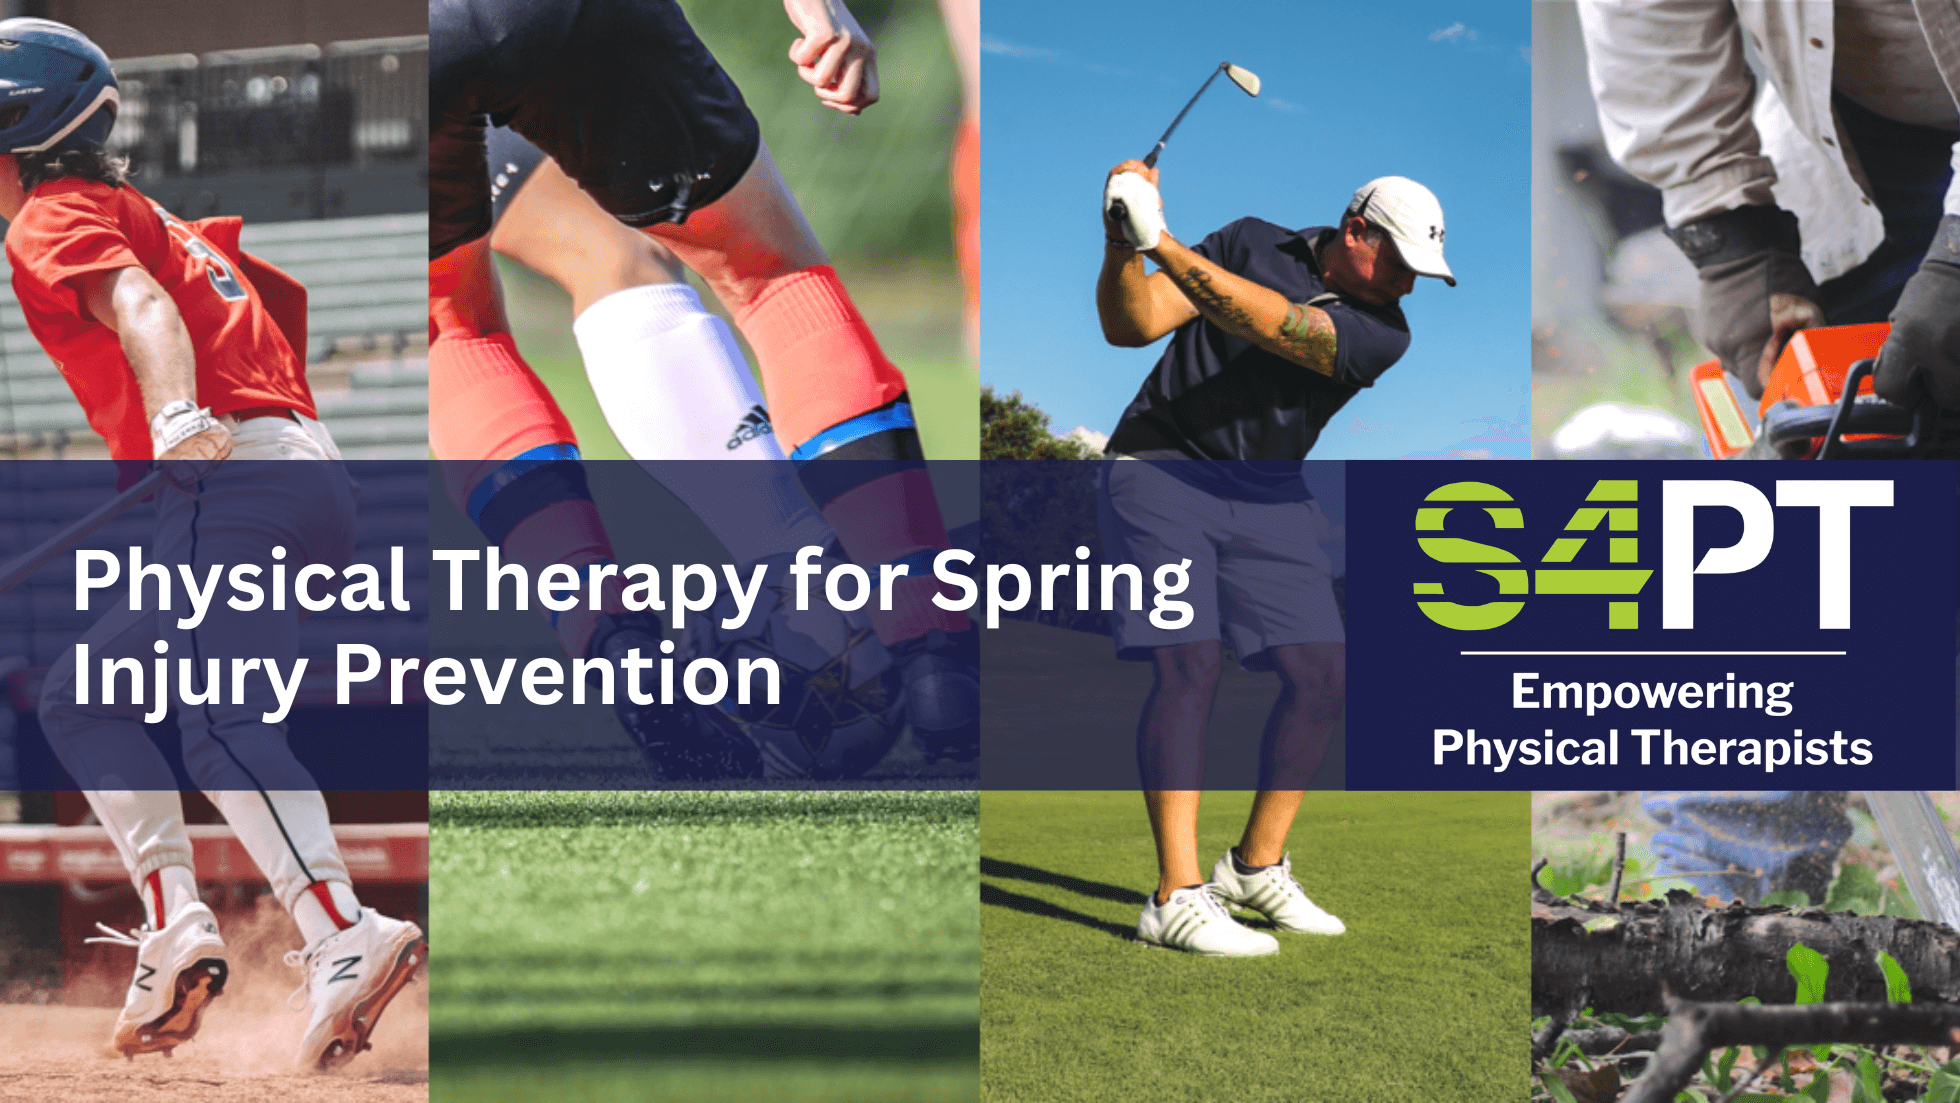 Physical therapy for spring injury prevention